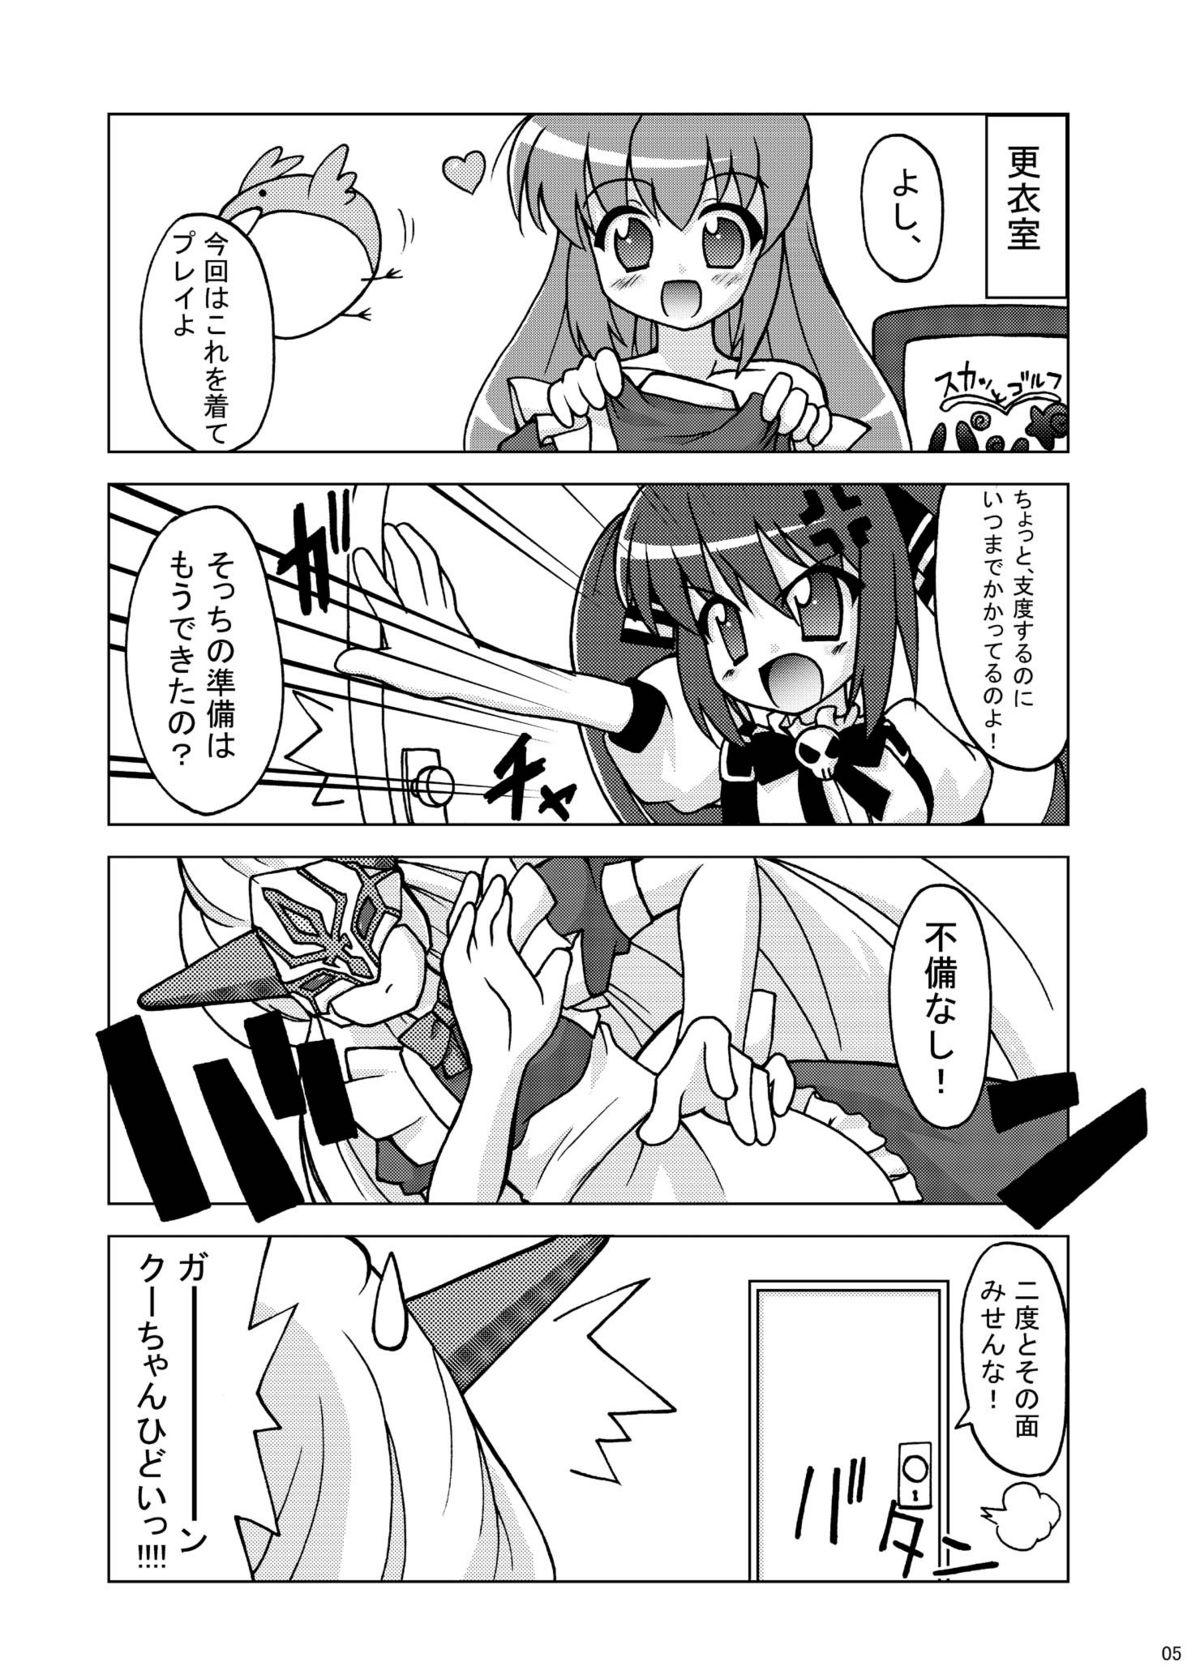 Best Blowjobs Next Level + omake - Pangya Swingers - Page 4